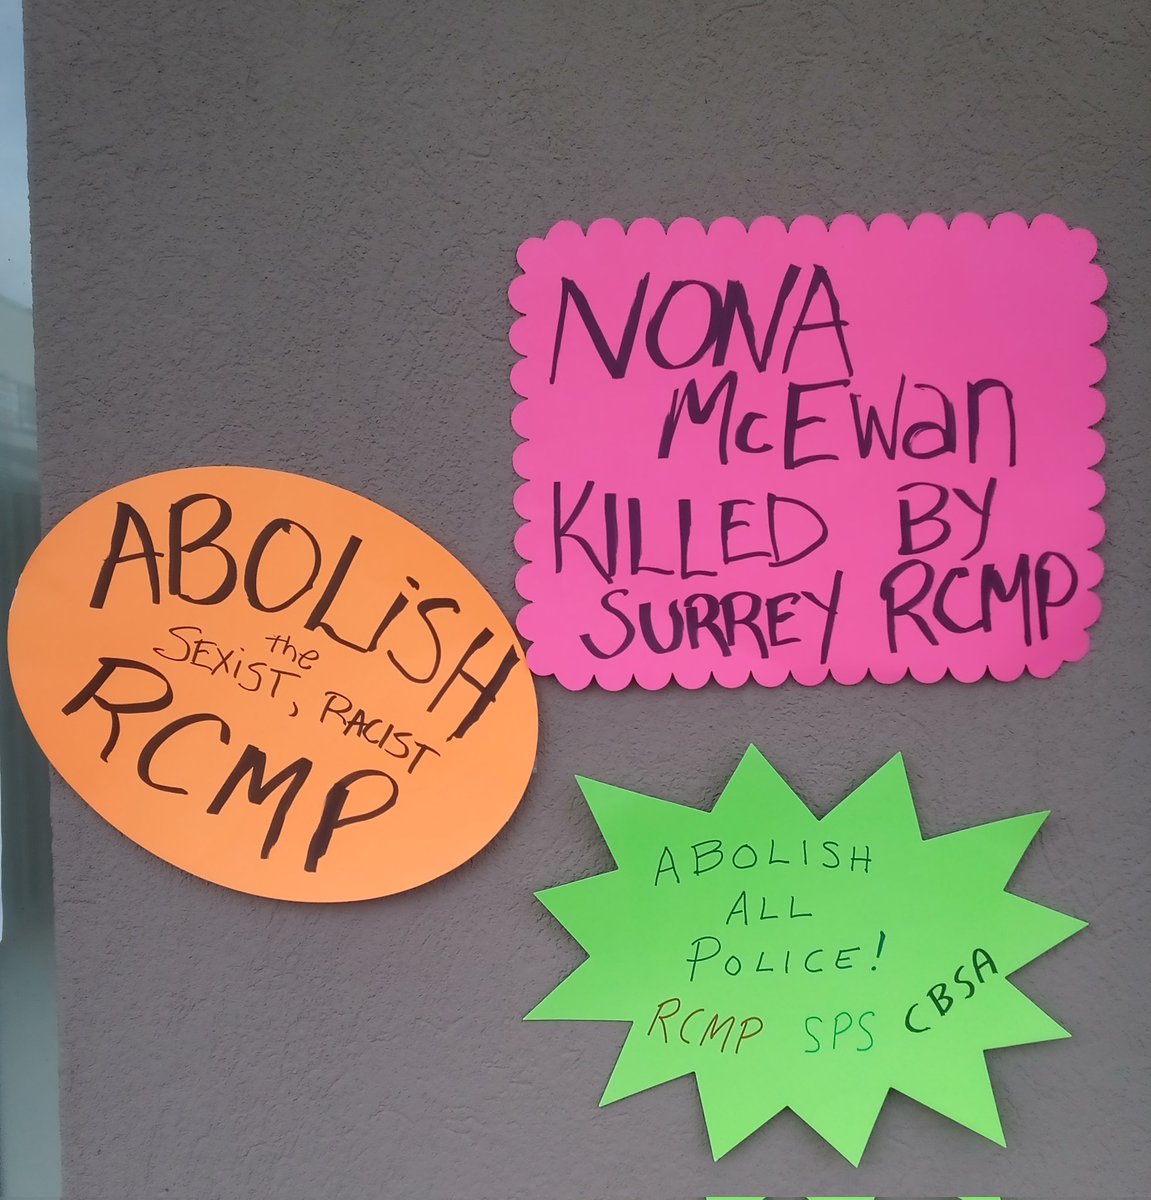 The coroner's inquest into the Surrey RCMP killing of Nona McEwan and Randy Crosson finally starts tomorrow.

#ACAB
#AbolishThePolice